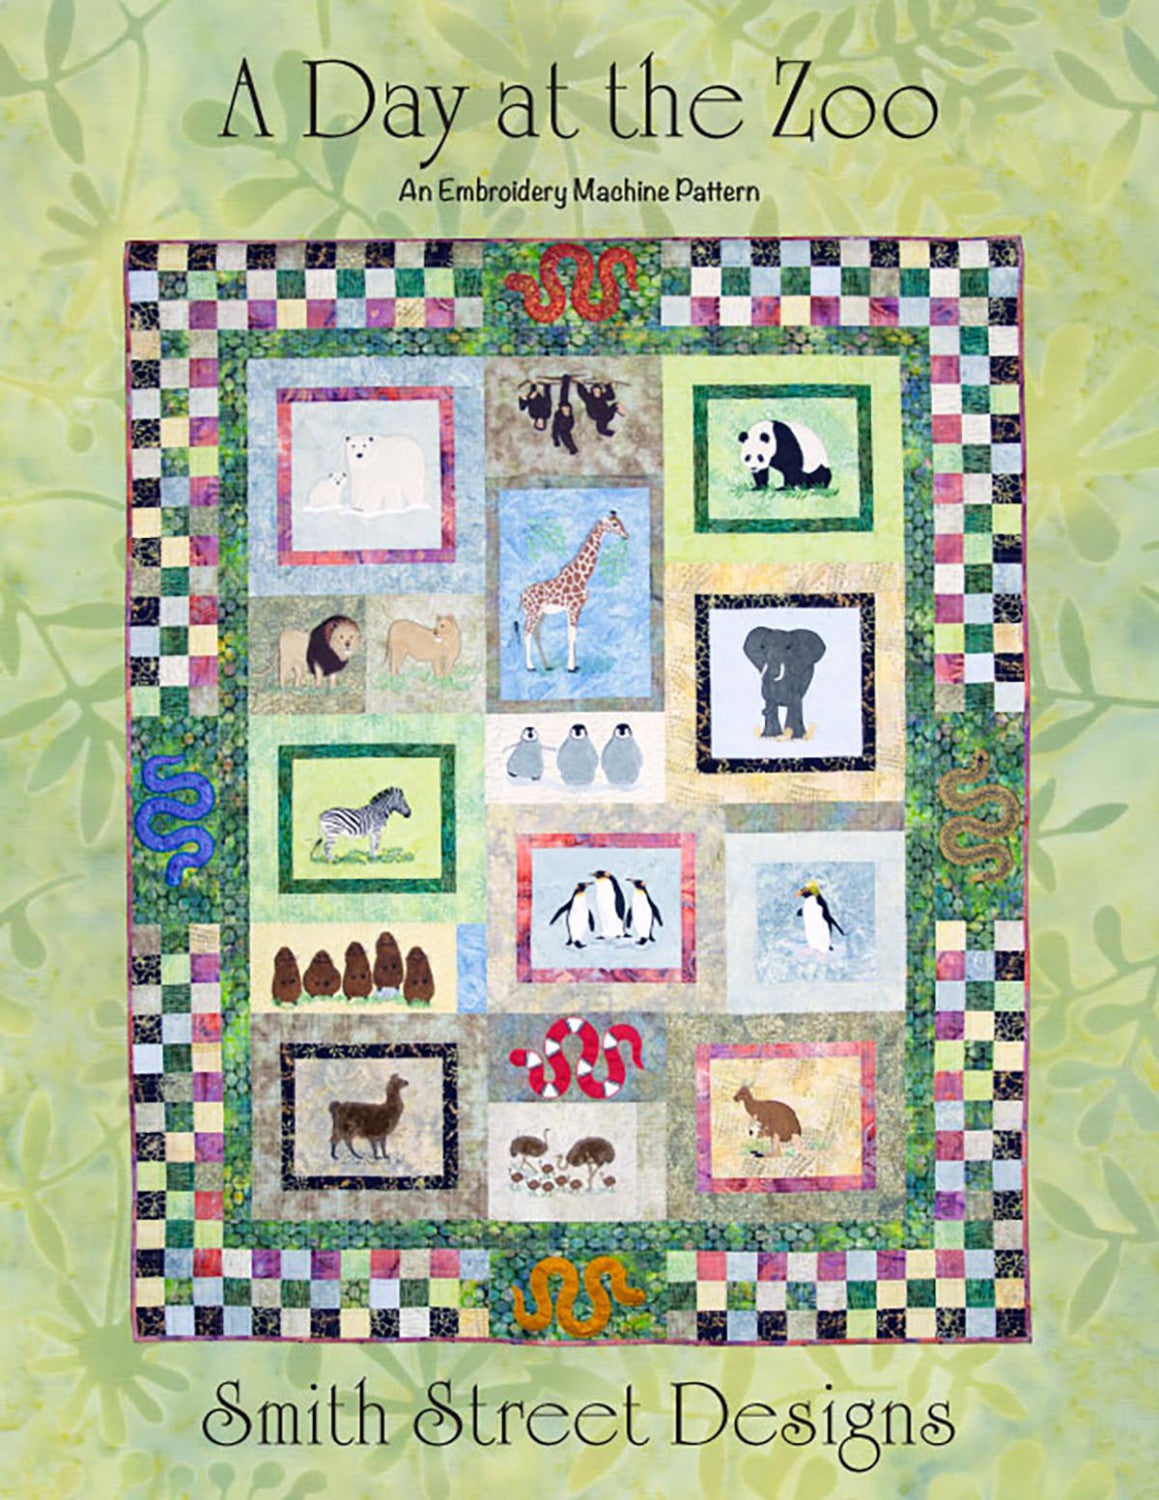 A Day at the Zoo Embroidery Machine Pattern